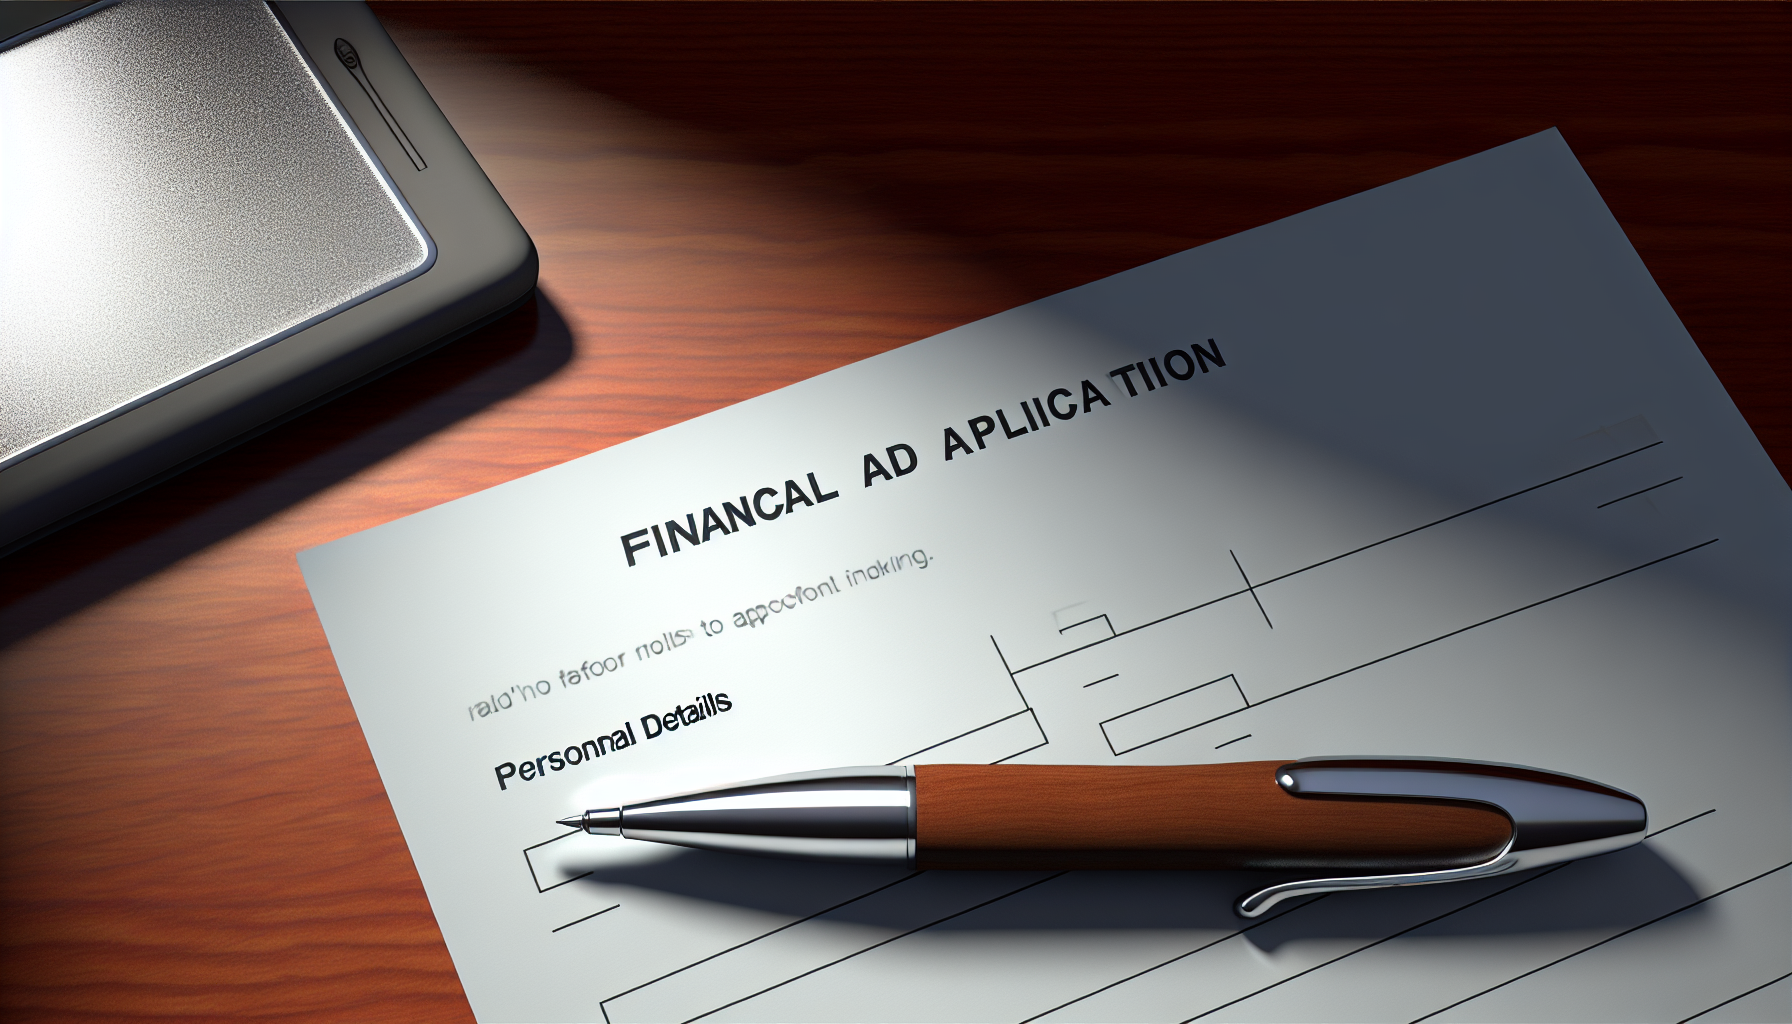 Financial aid application form with a pen and calculator